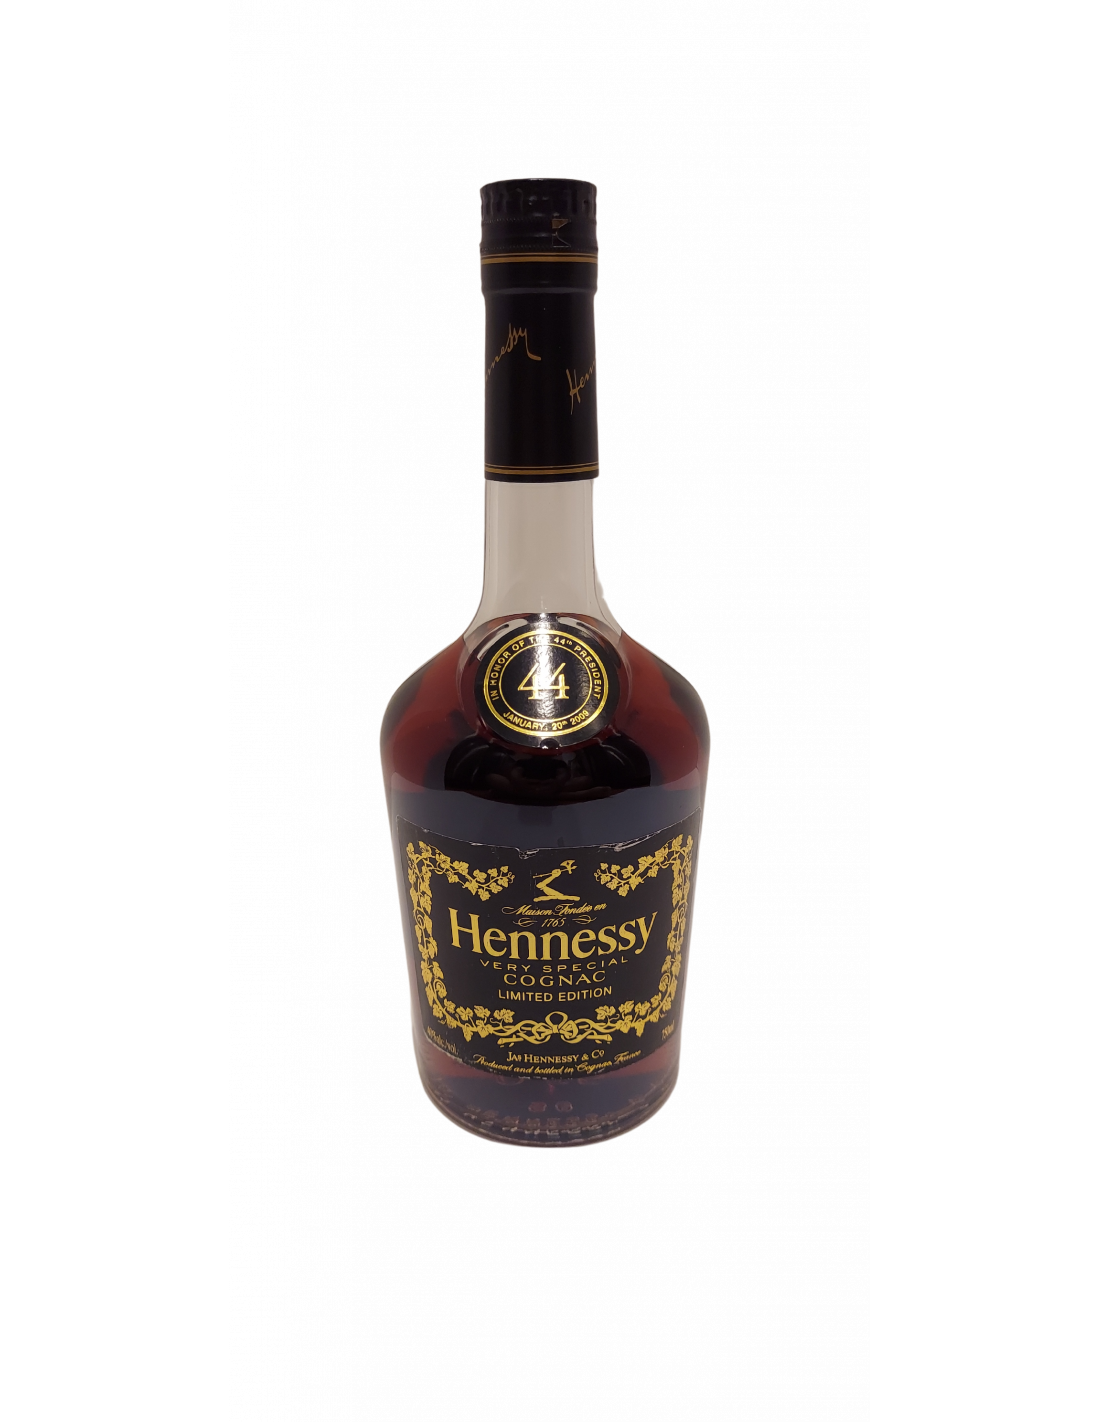 Hennessy Cognac Limited Edition V.S. In honor of the 44th President